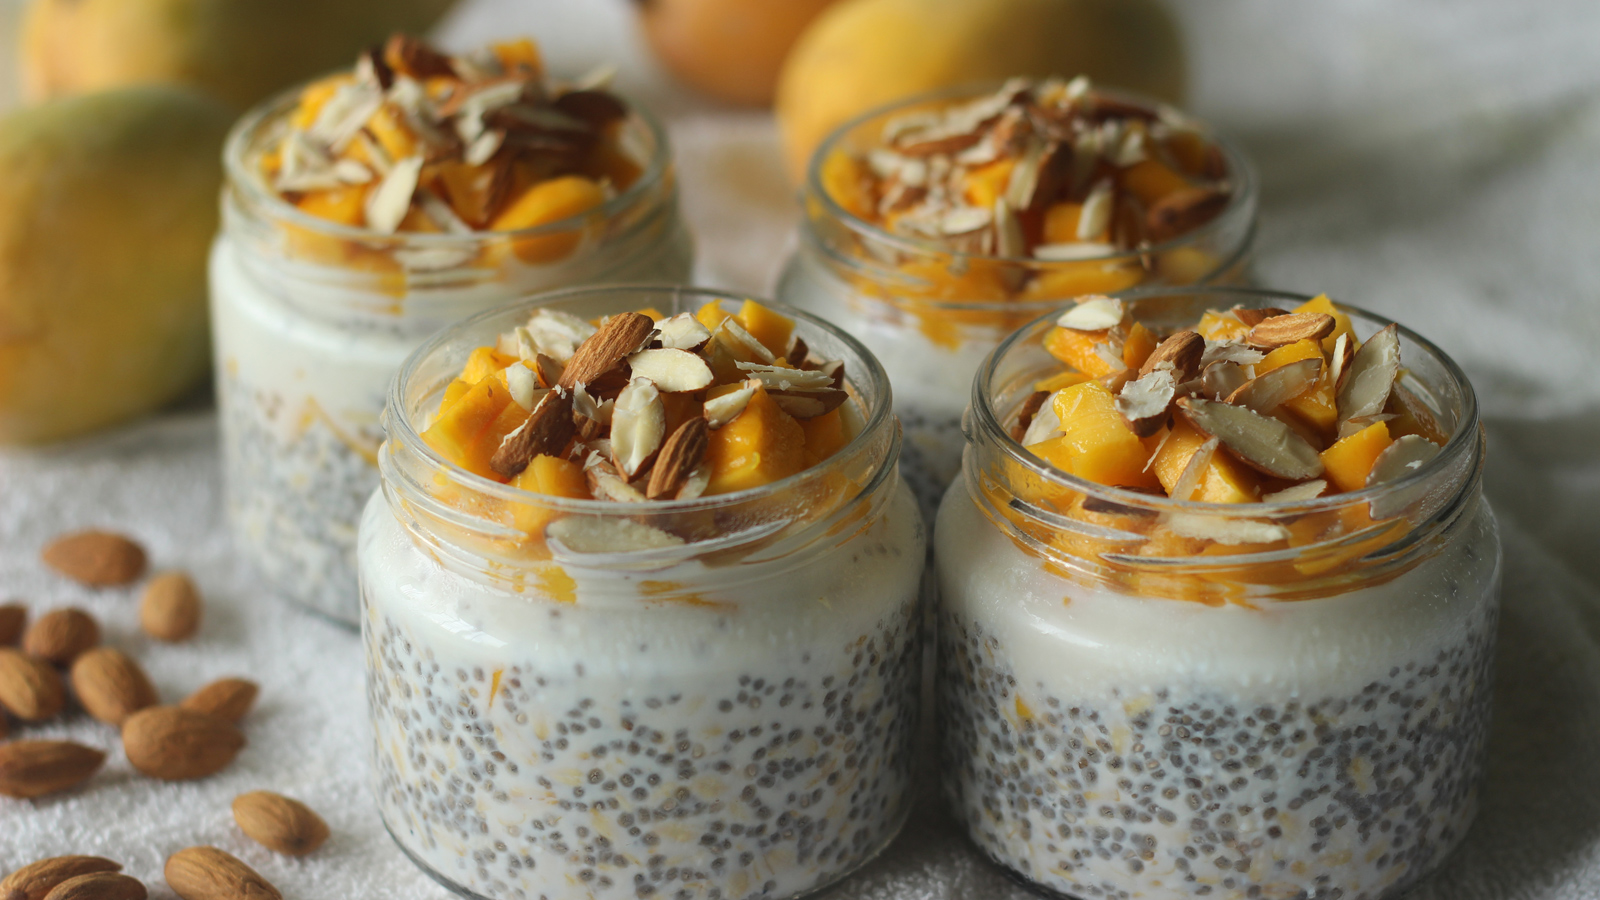 Ideas for healthy breakfast meal prep. Meal prep jars filled with overnight oats and topped with tropical fruit and nuts.